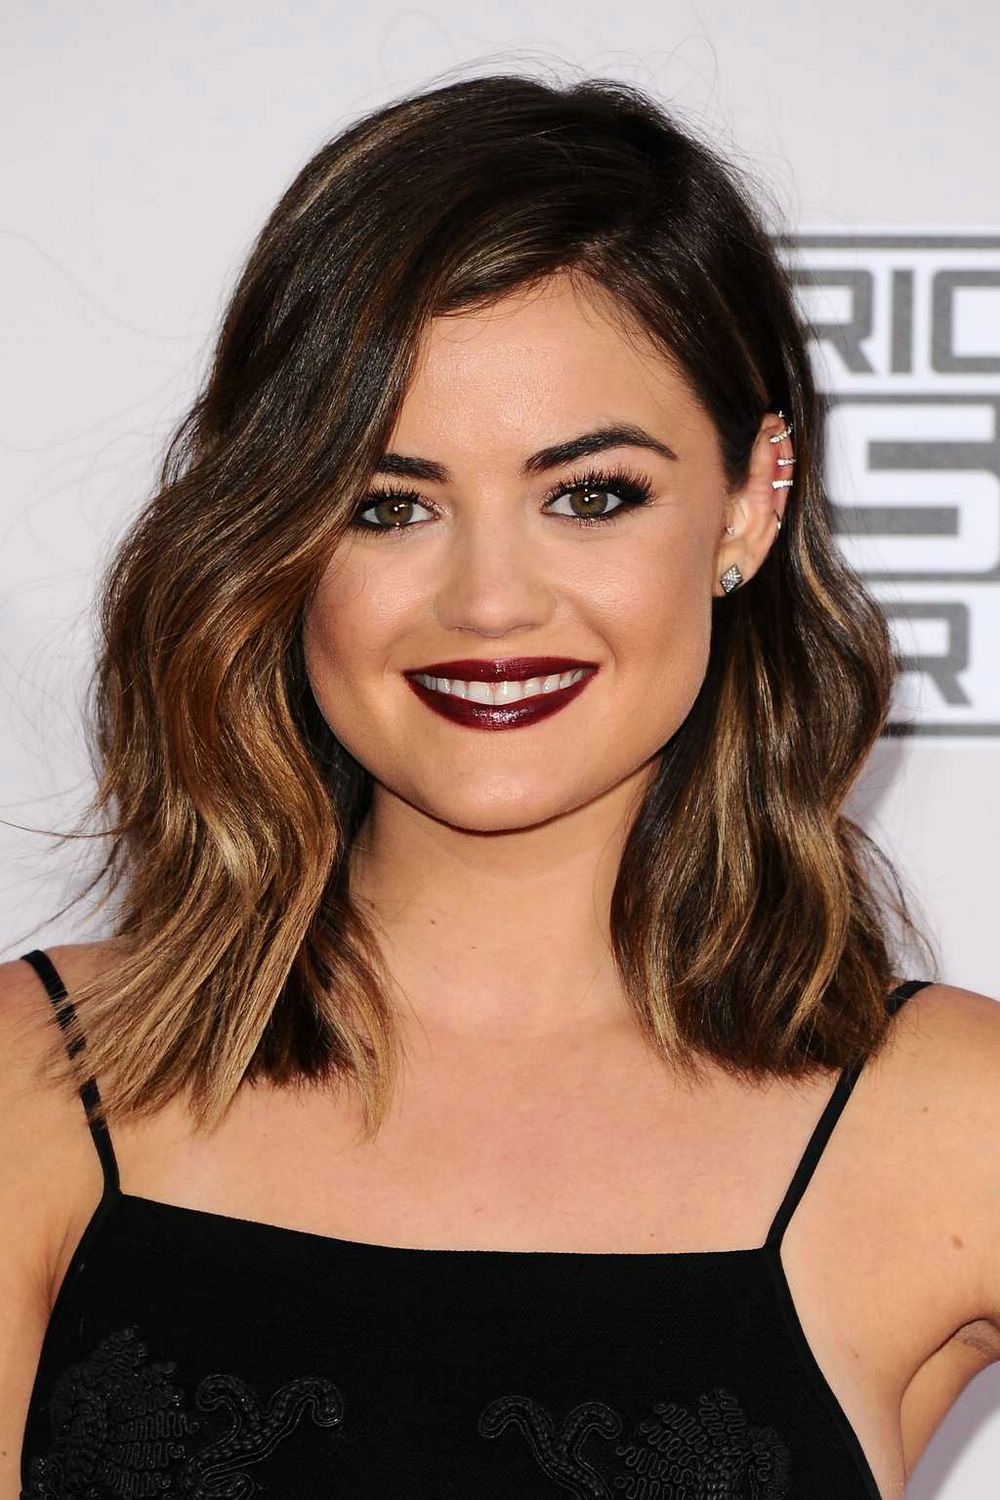 Lucy Hale photo 376 of 2022 pics, wallpaper - photo #743987 - ThePlace2